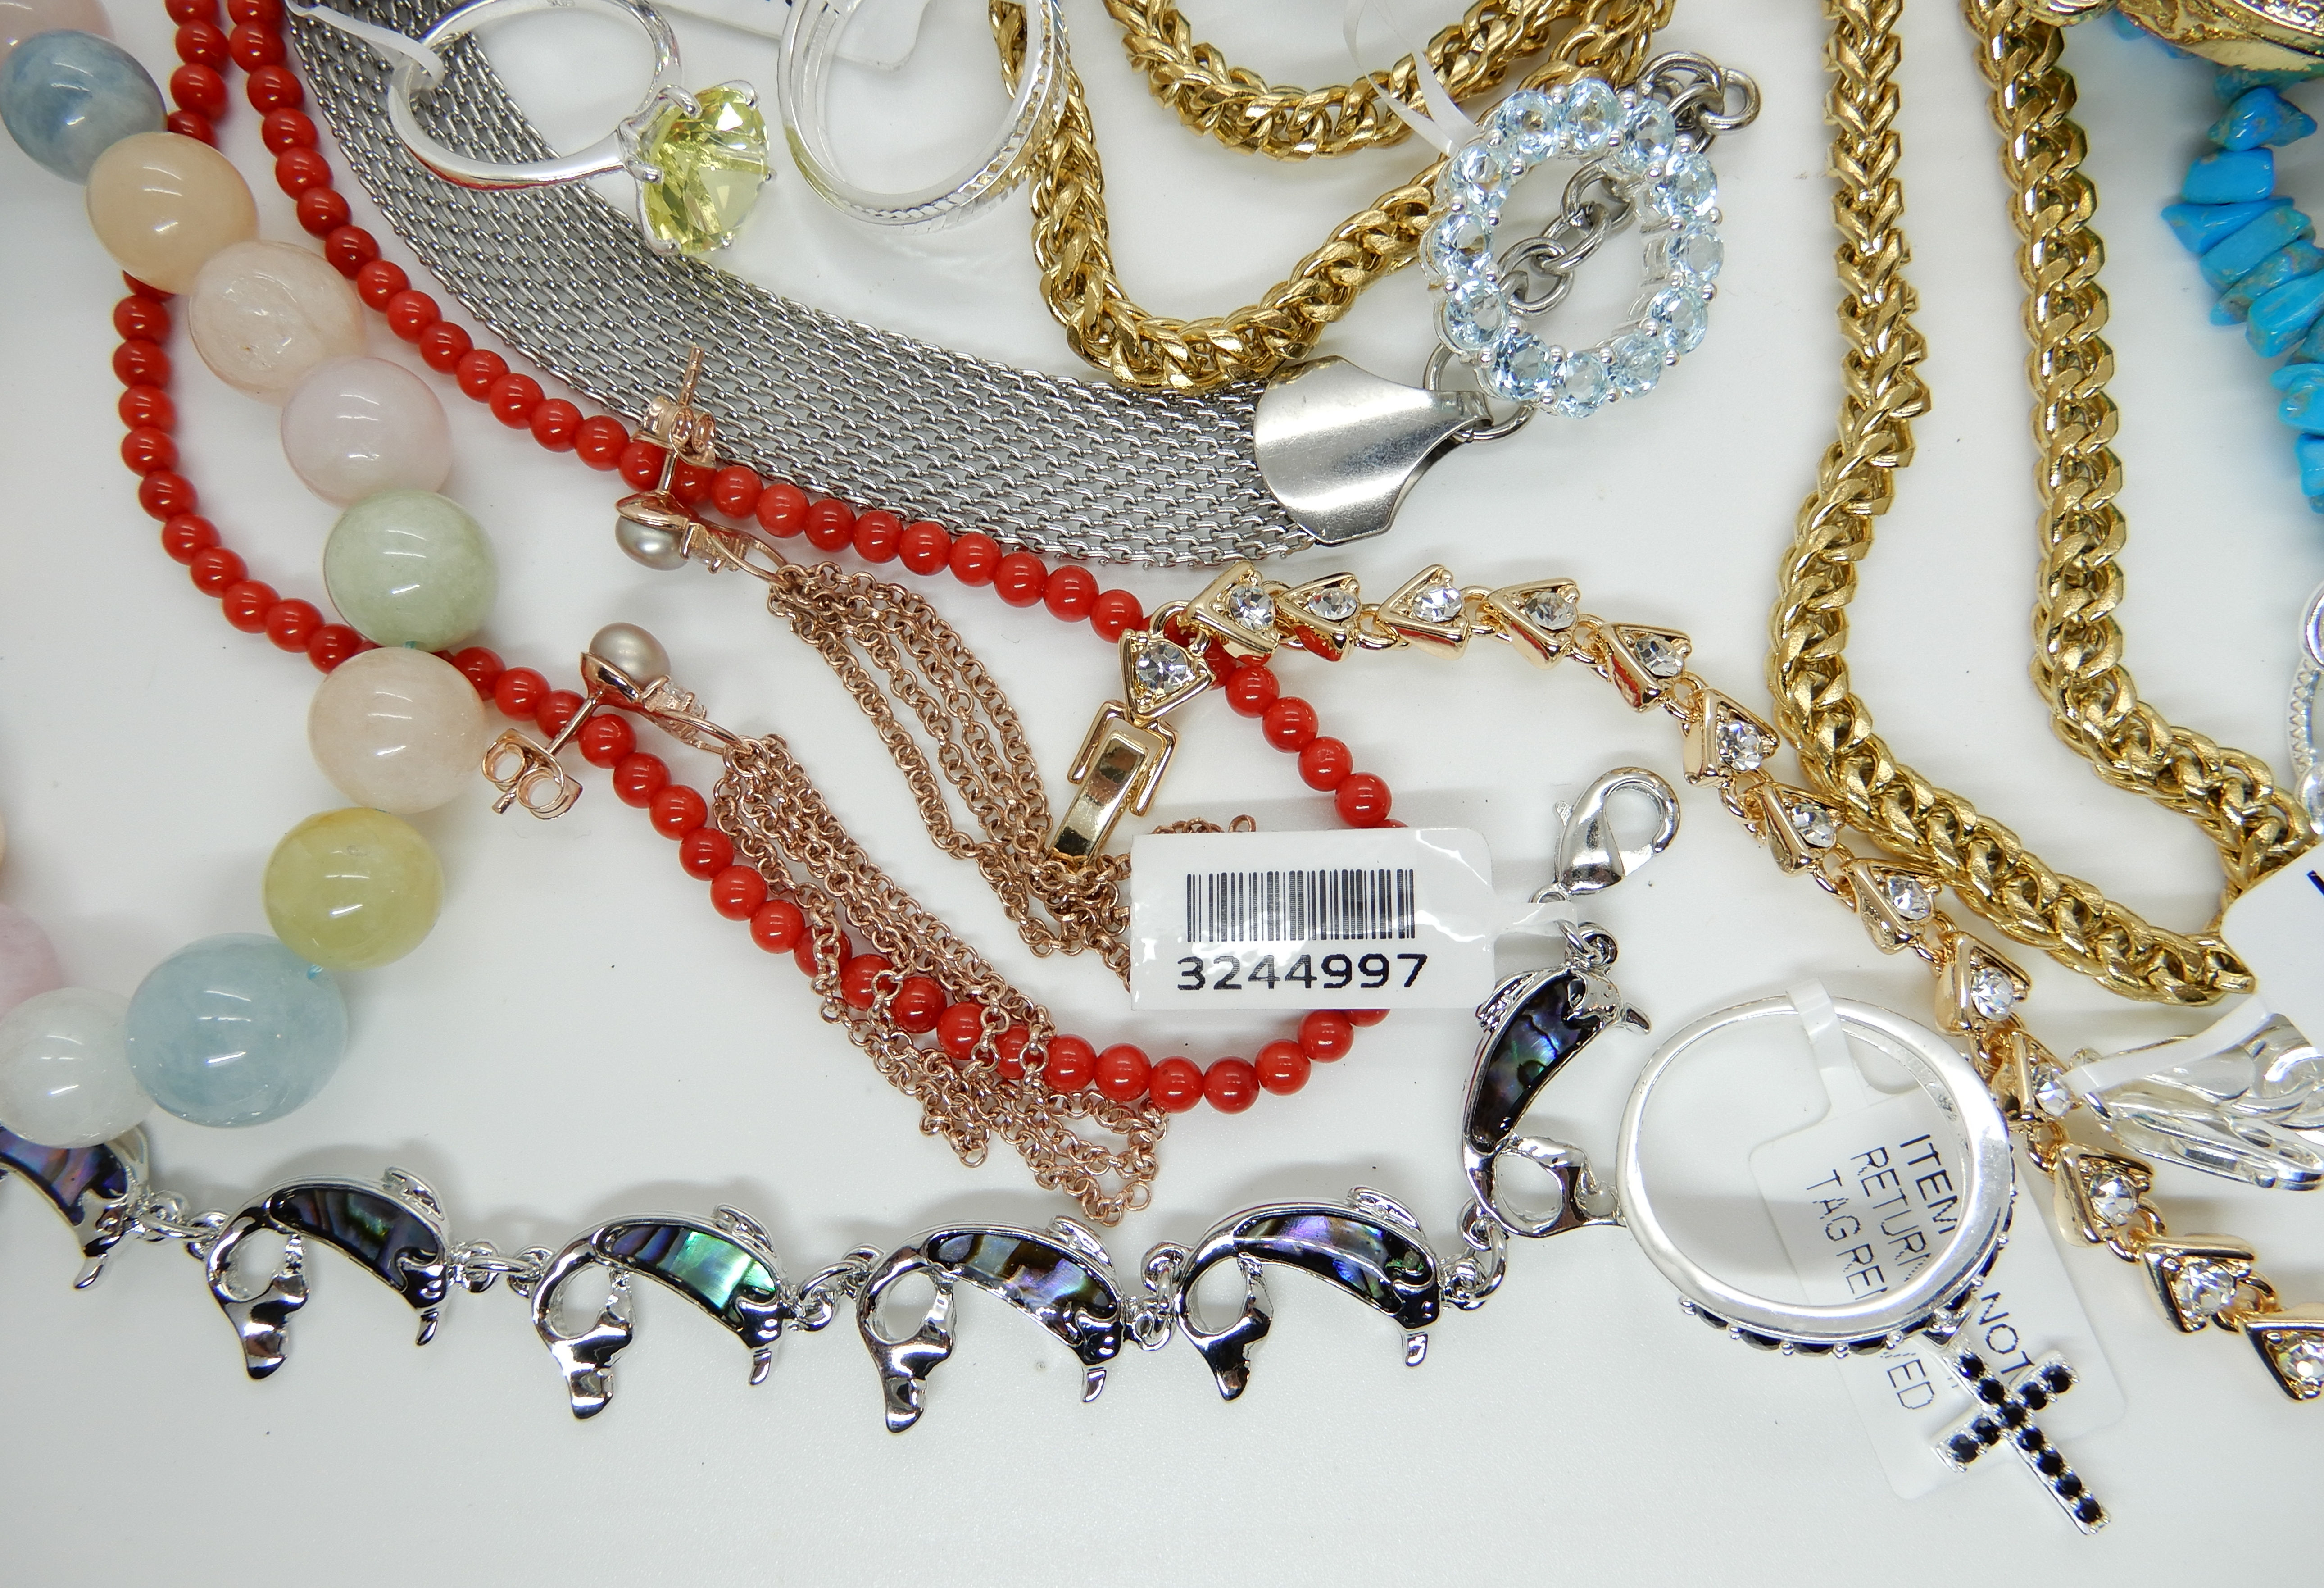 A large collection of silver and costume jewellery from The Jewellery Channel, new with tags, to - Image 10 of 10